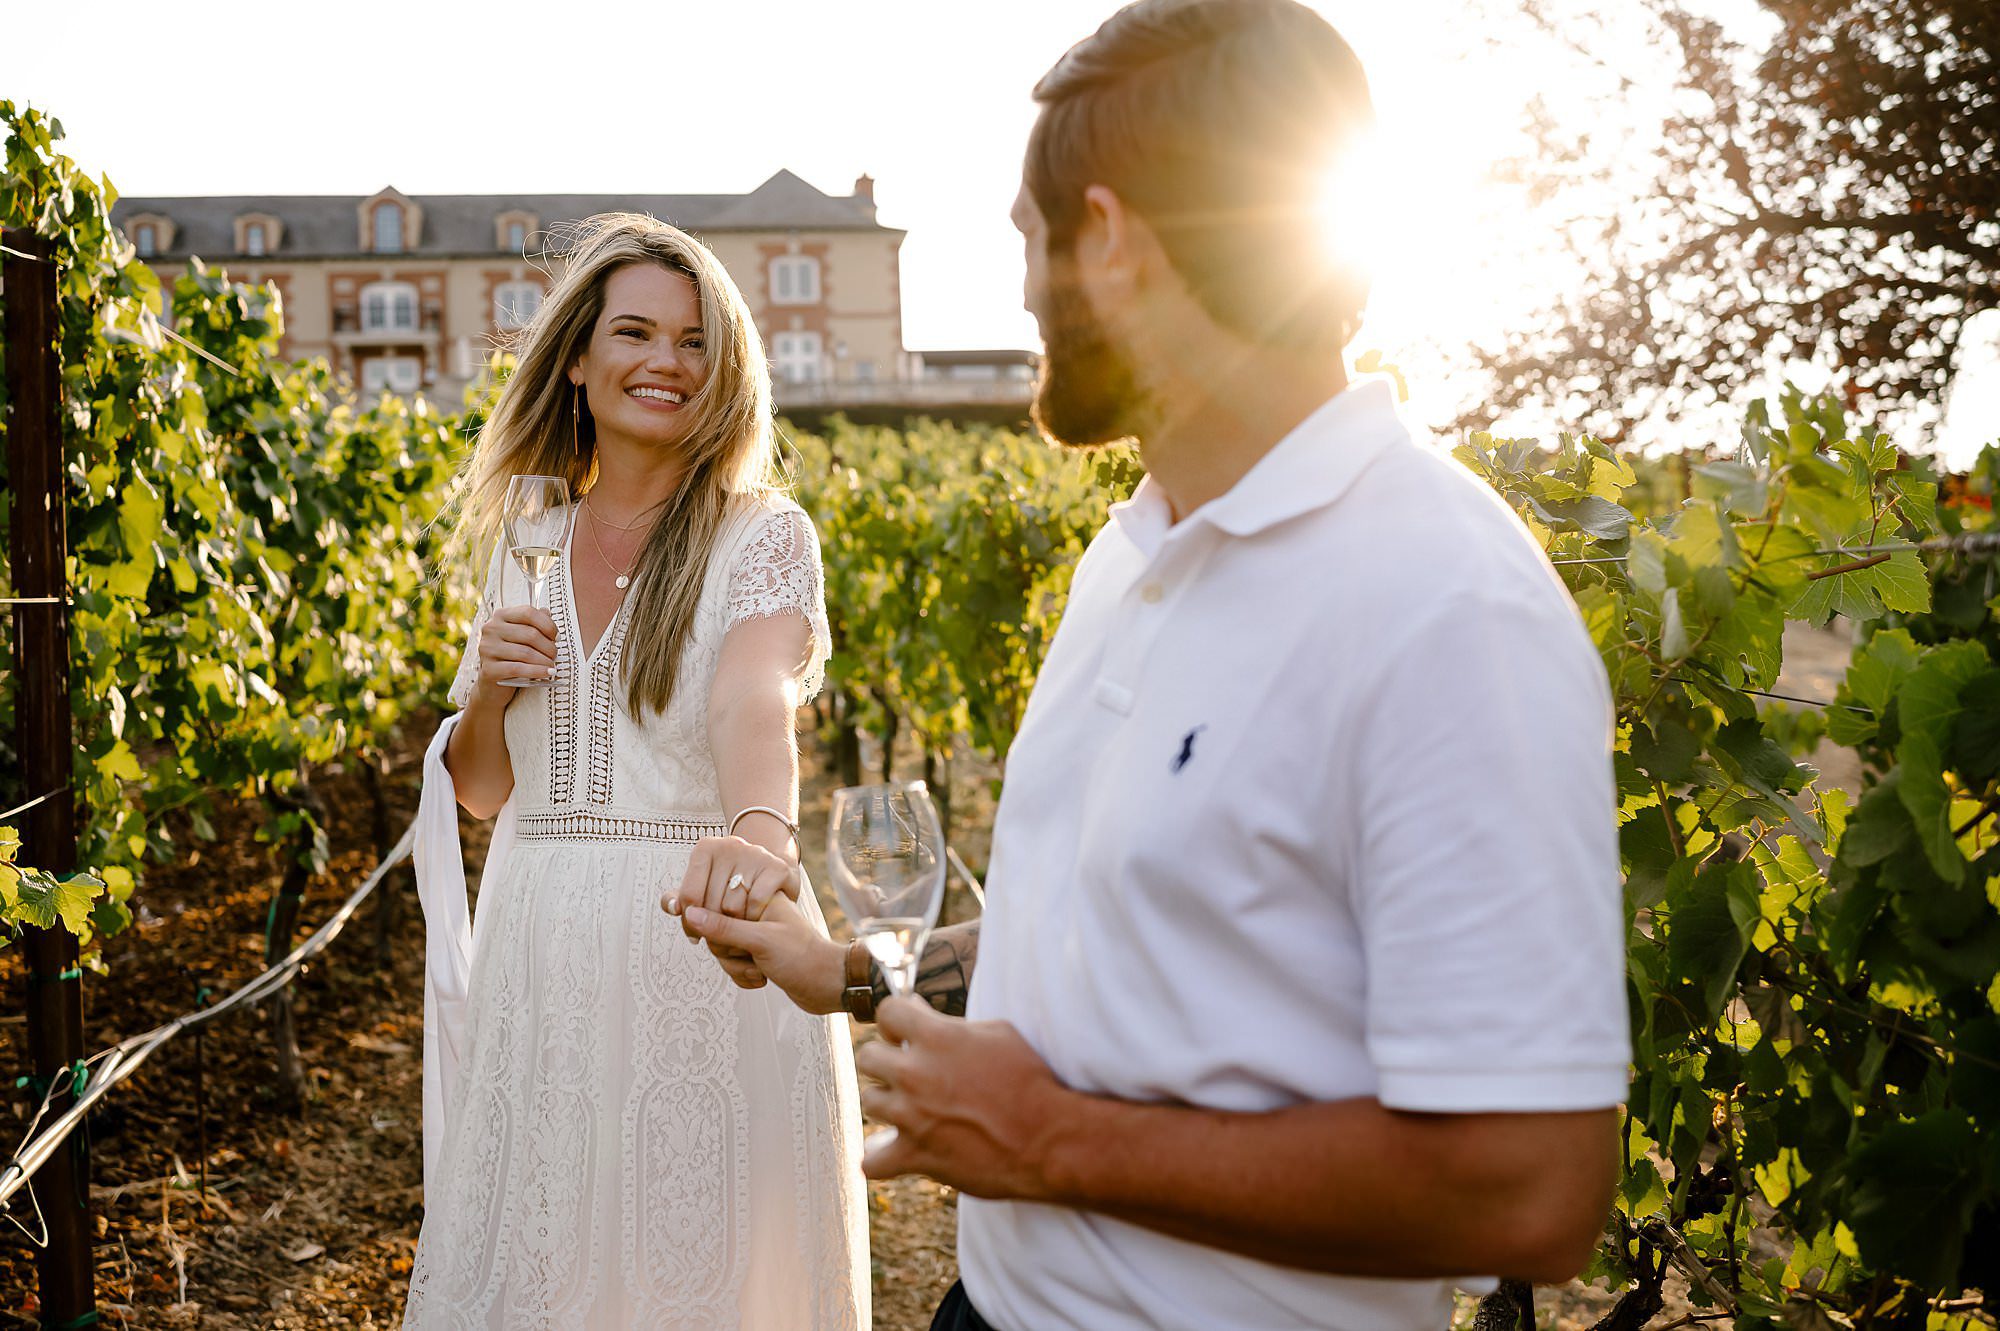 Cameron leads Melissa through the vineyard at Domaine Carneros